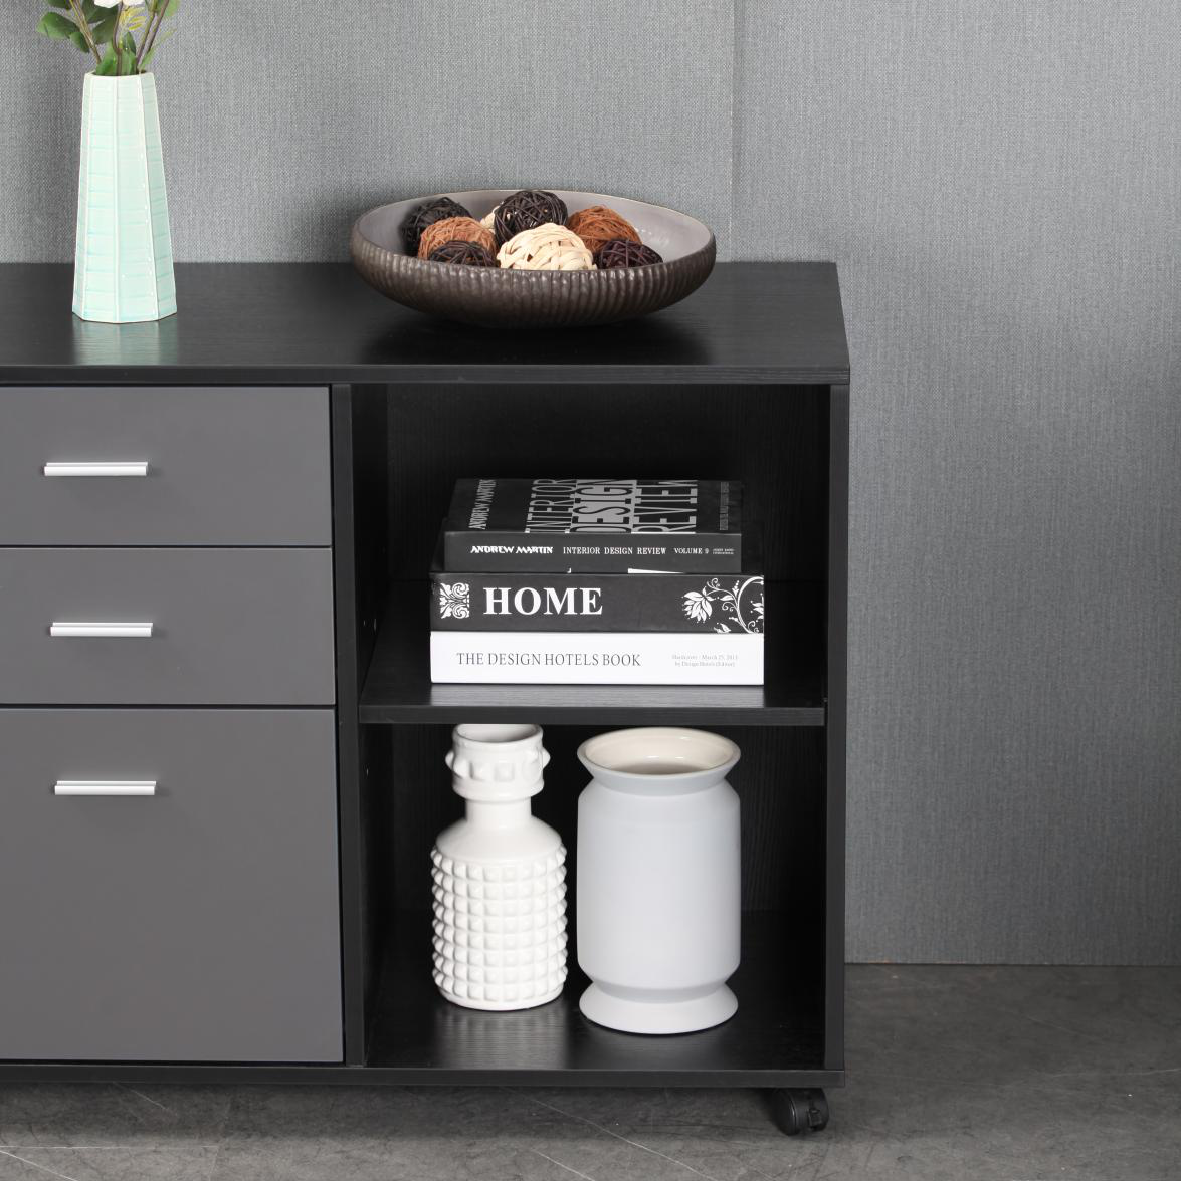 File Cabinet with 3 Drawer Mobile Lateral Filing Cabinet/Storage Cabinet for Home Office Black & Dark Grey